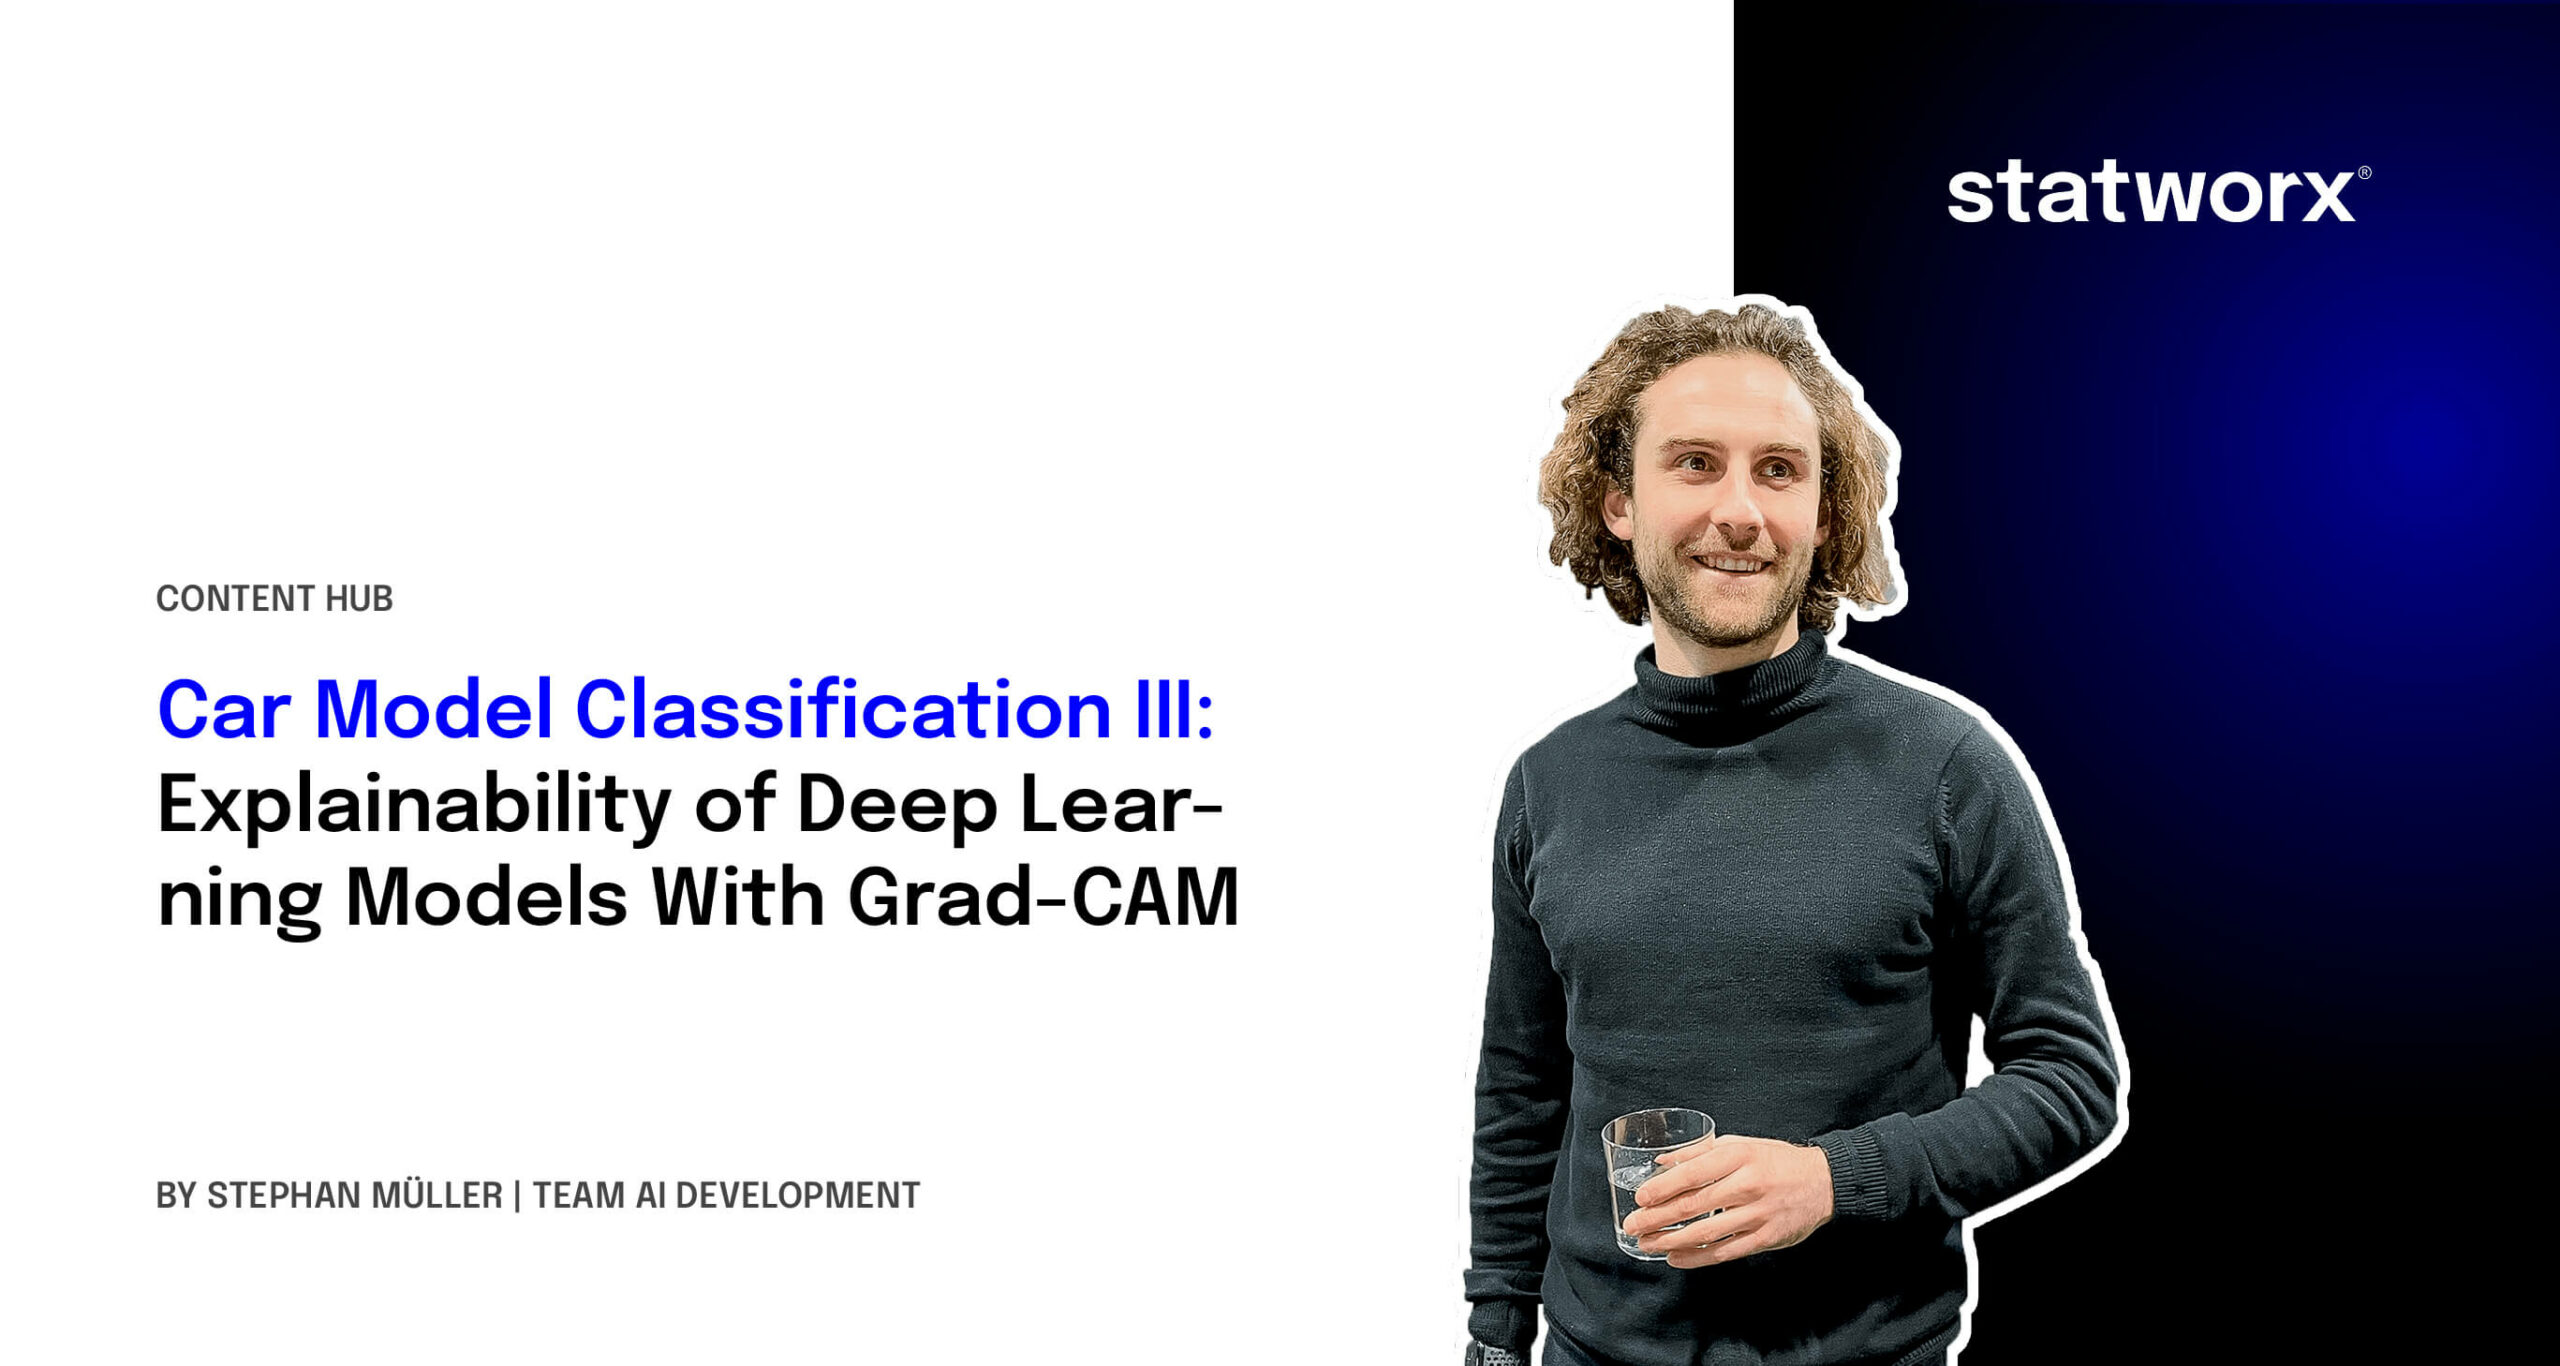 Car Model Classification III: Explainability of Deep Learning Models With Grad-CAM